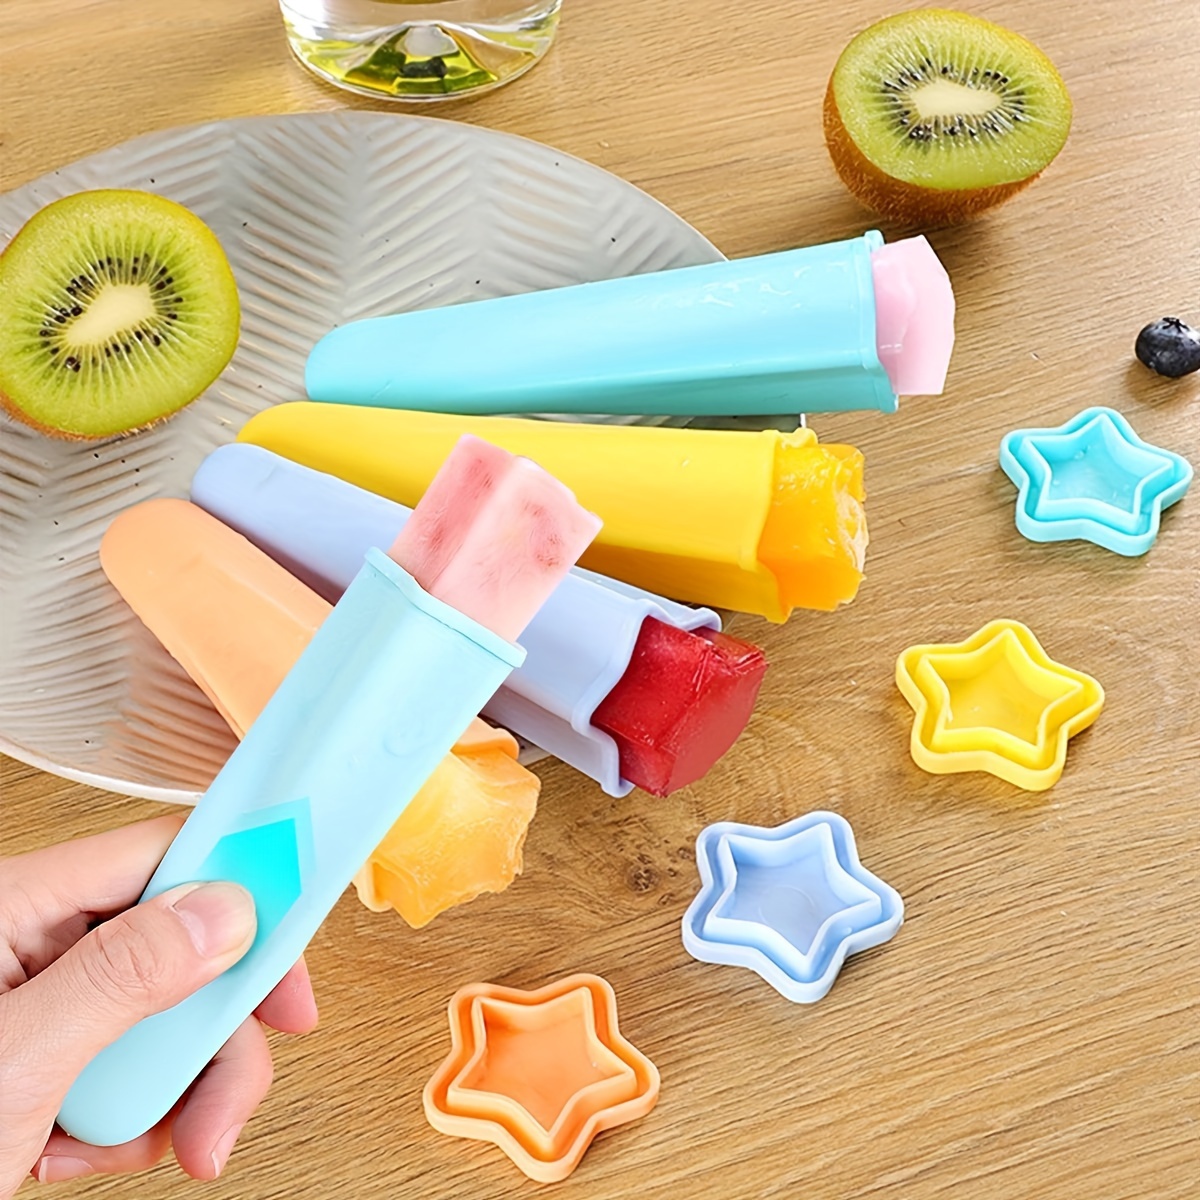 Popsicles Molds,Small Silicone Popsicle Molds For Toddlers,Homemade Frozen  Baby Popsicles Molds For Kids,Popsicle Molds Silicone Bpa Free,Mini Ice Pop